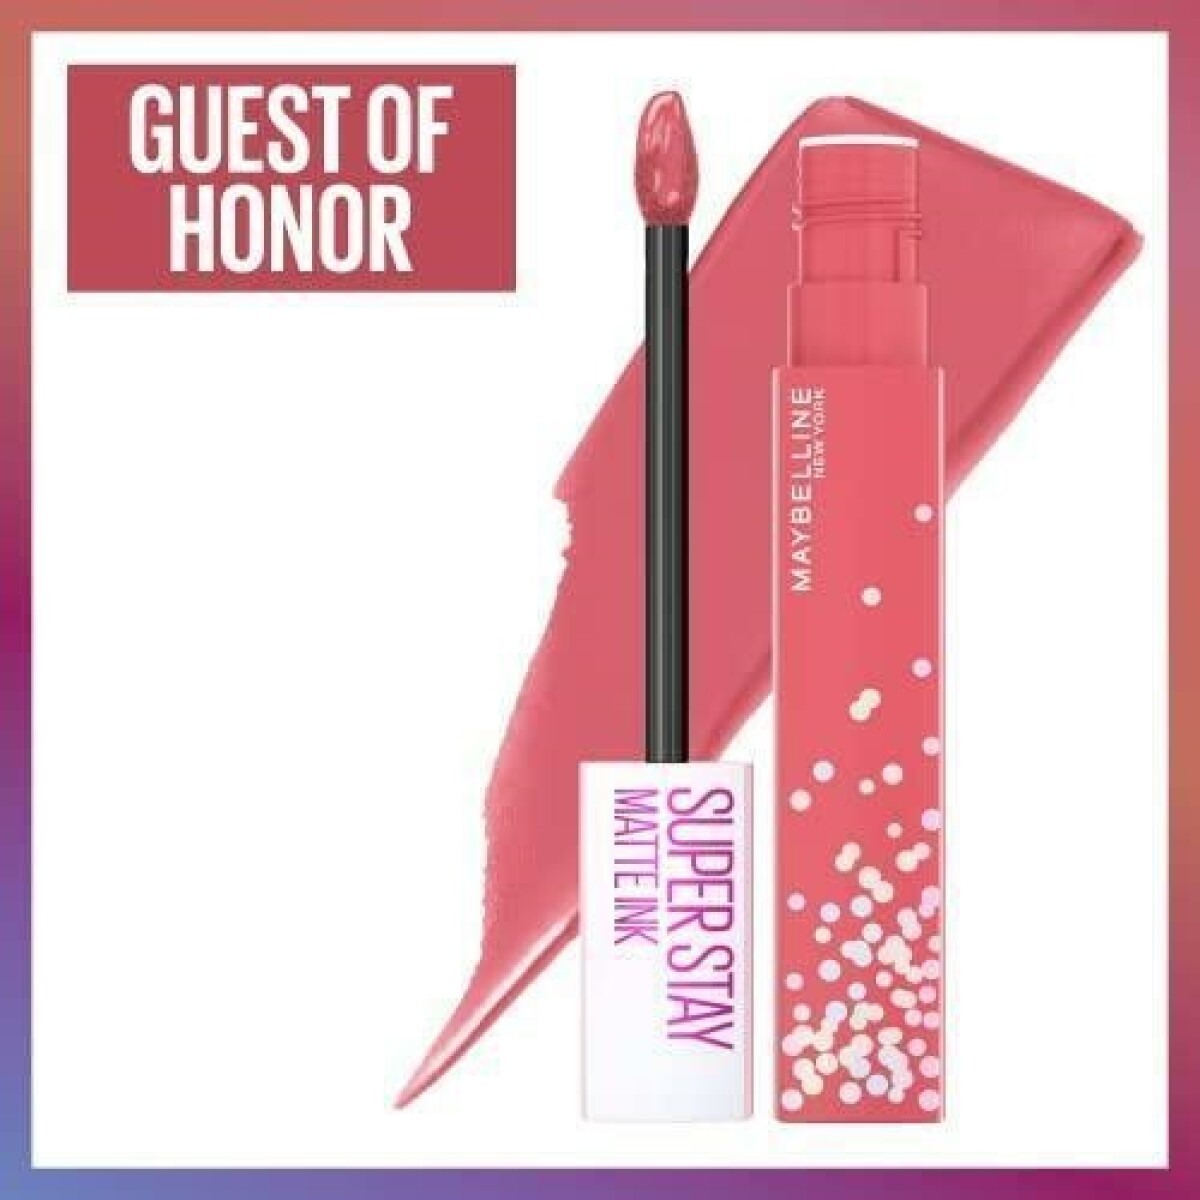 Labial Maybelline Ss M Ink Birthday G. Honor 